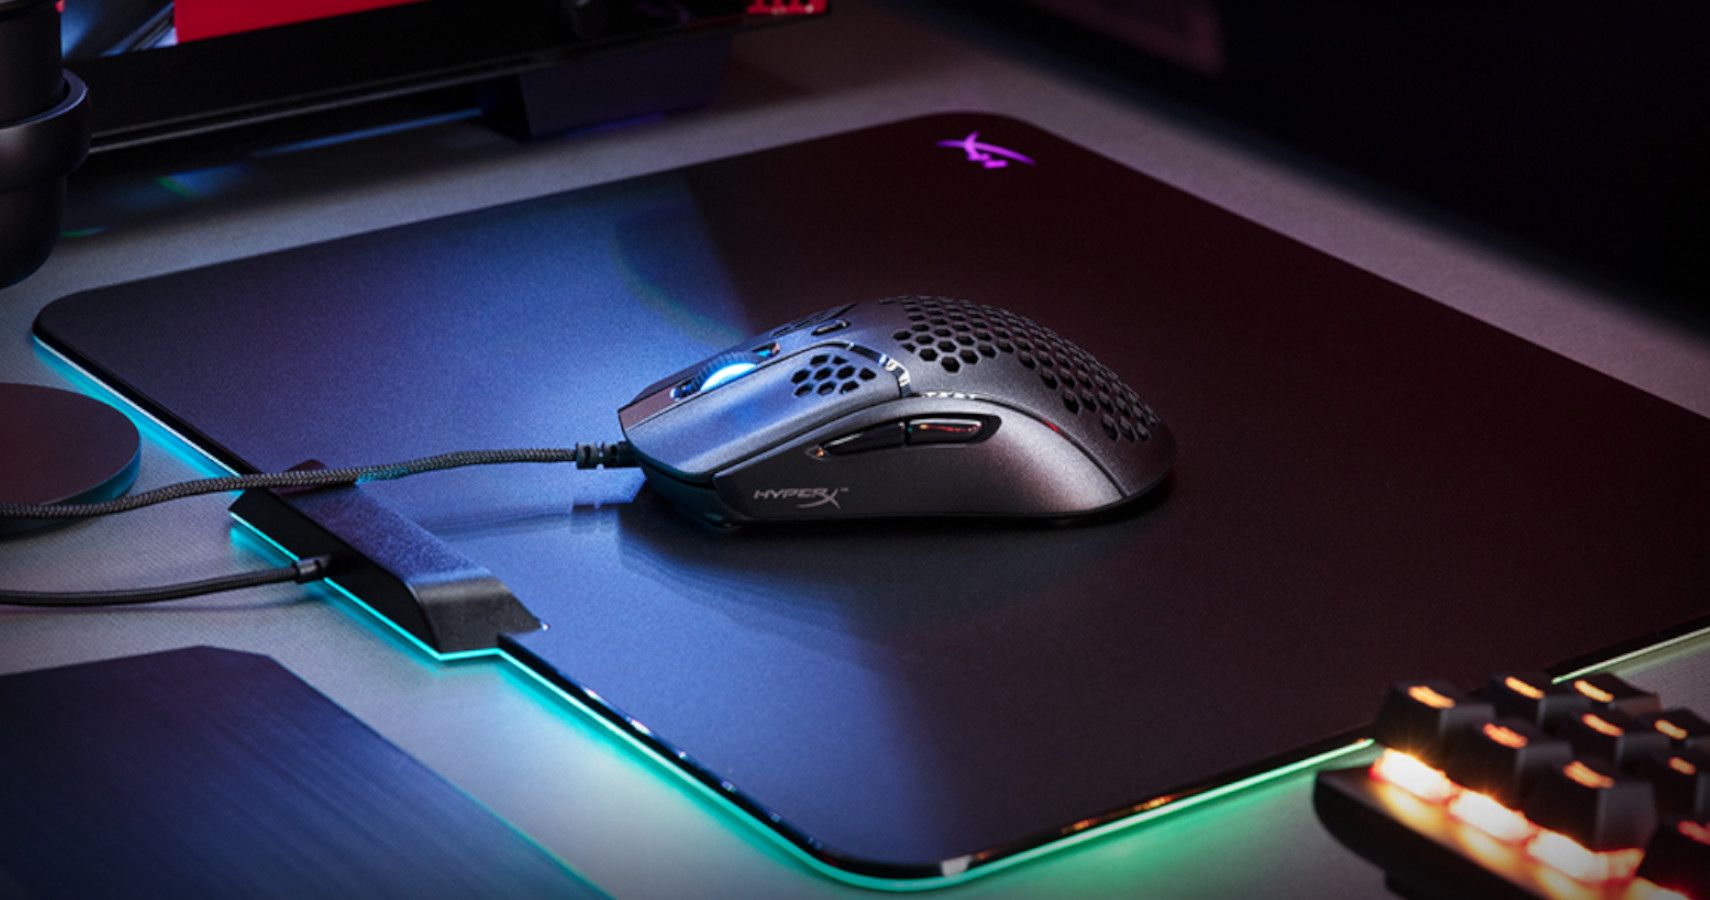 HyperX Pulsefire Haste Review The Leader Of The Pack In UltraLight